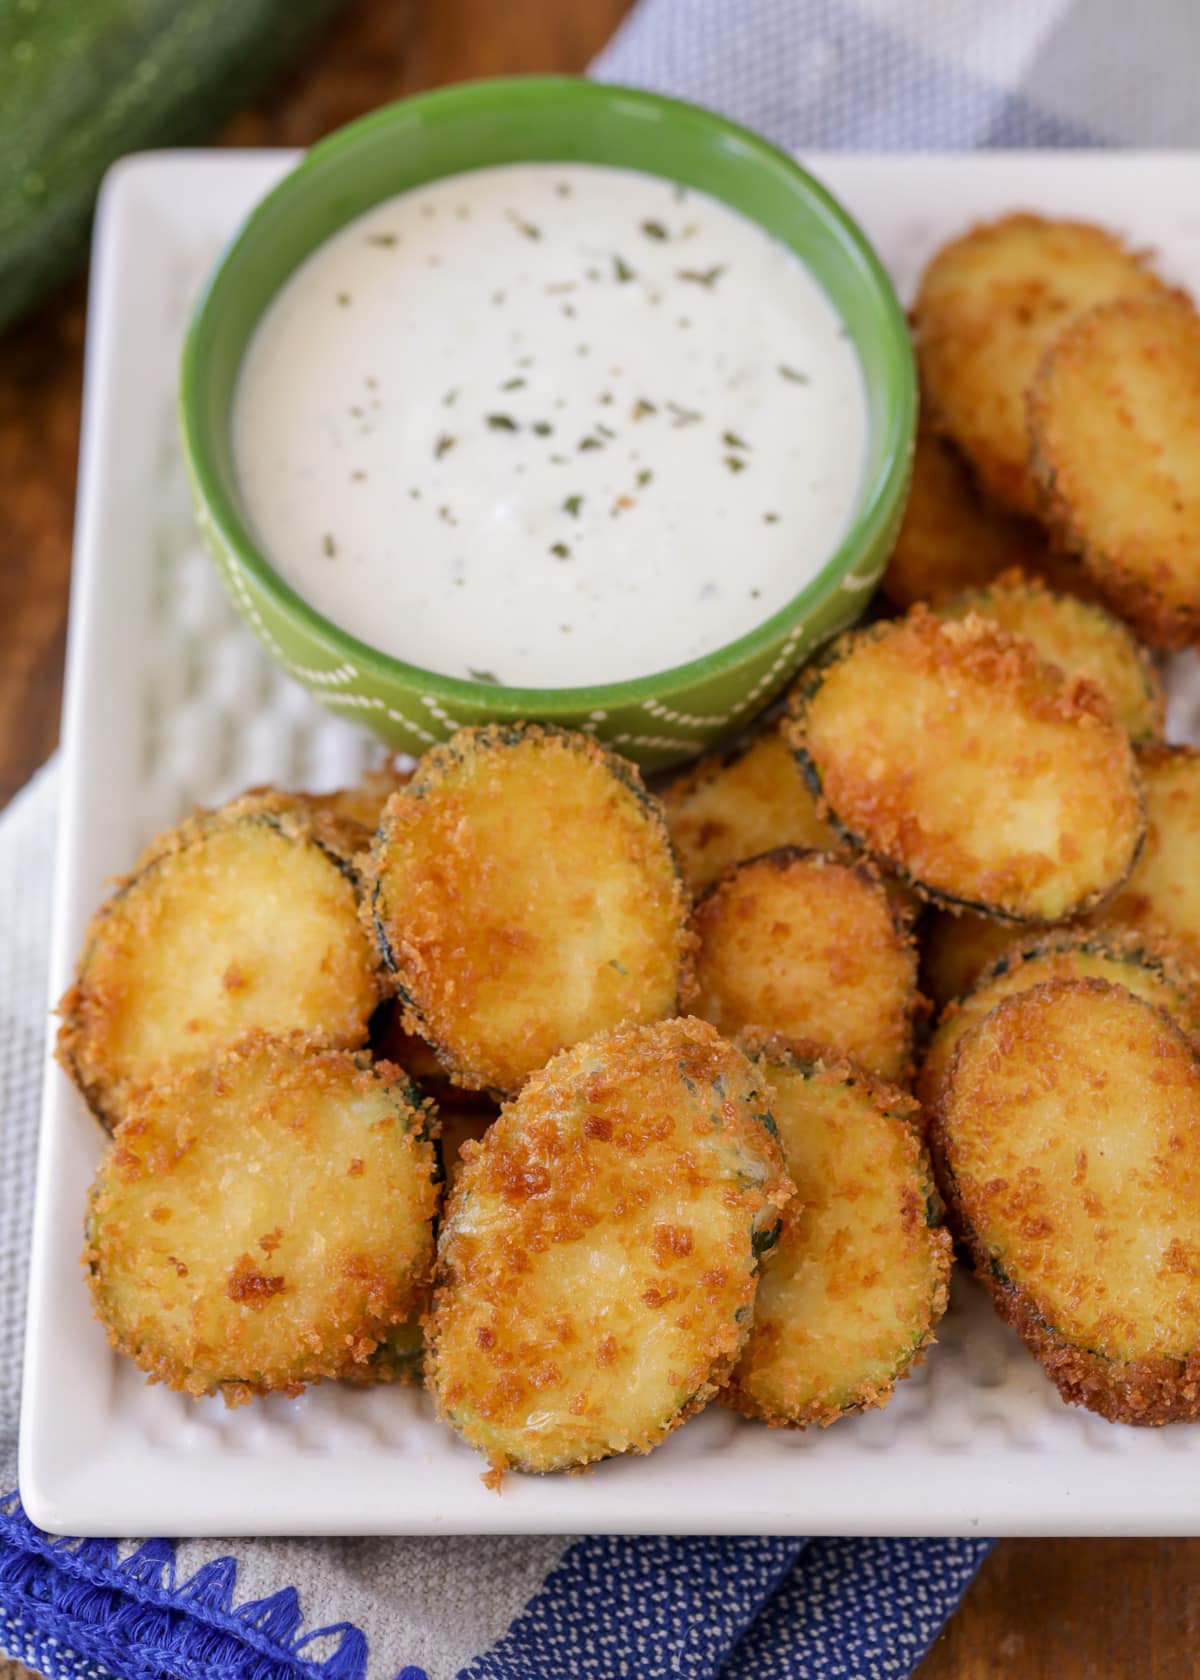 Fried zucchini to pair with chicken parmesan sliders.